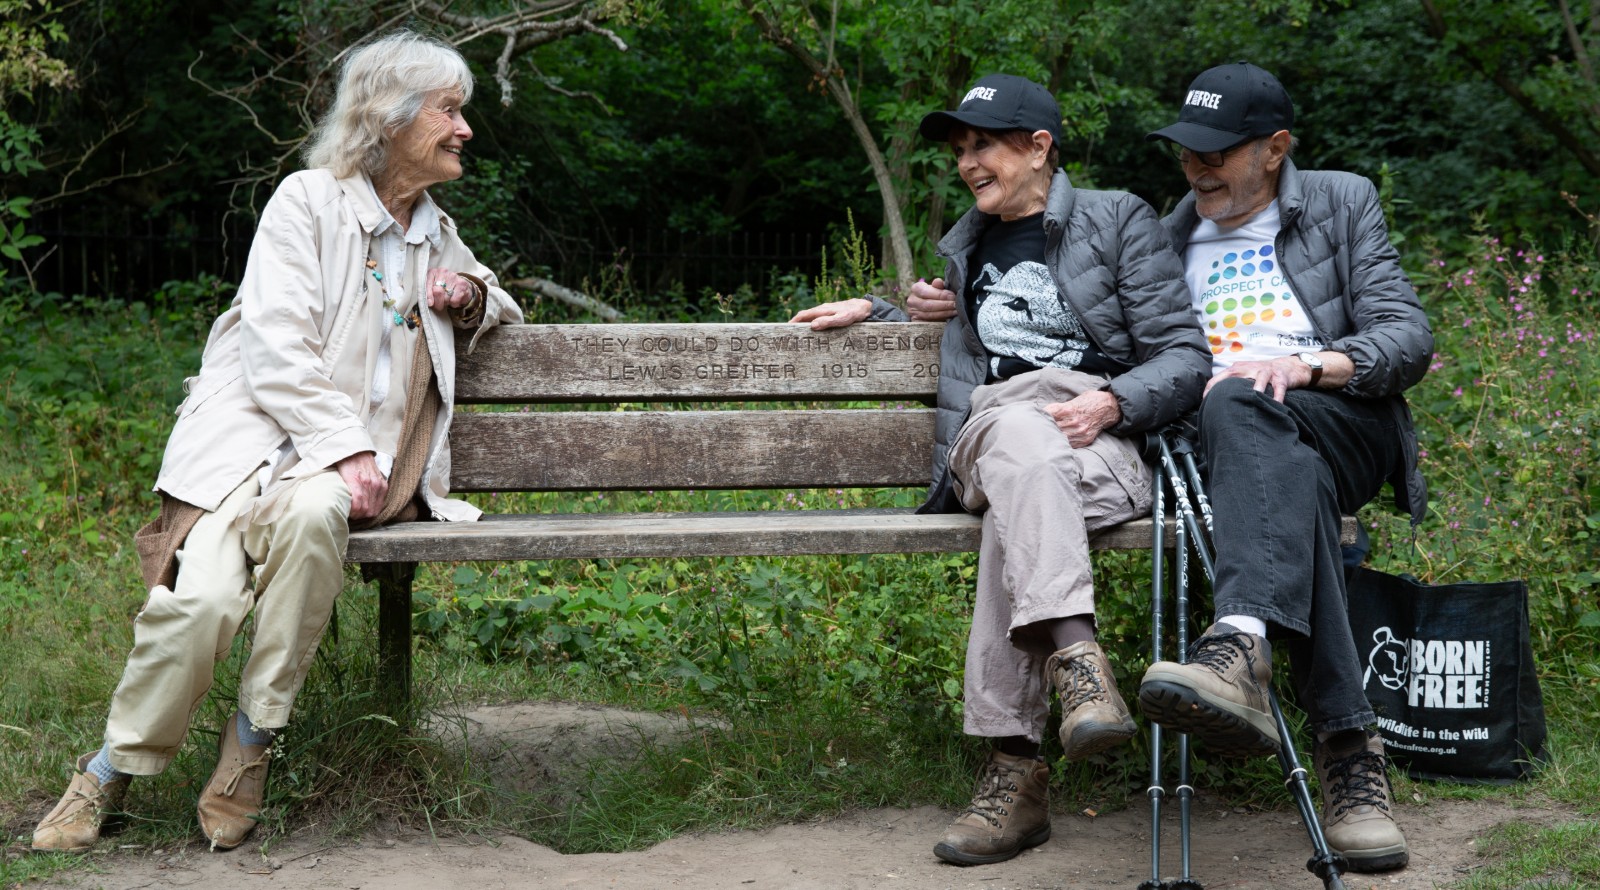 Virginia McKenna sat on a bench with Martin and Angela Humphery after one of their charity walks